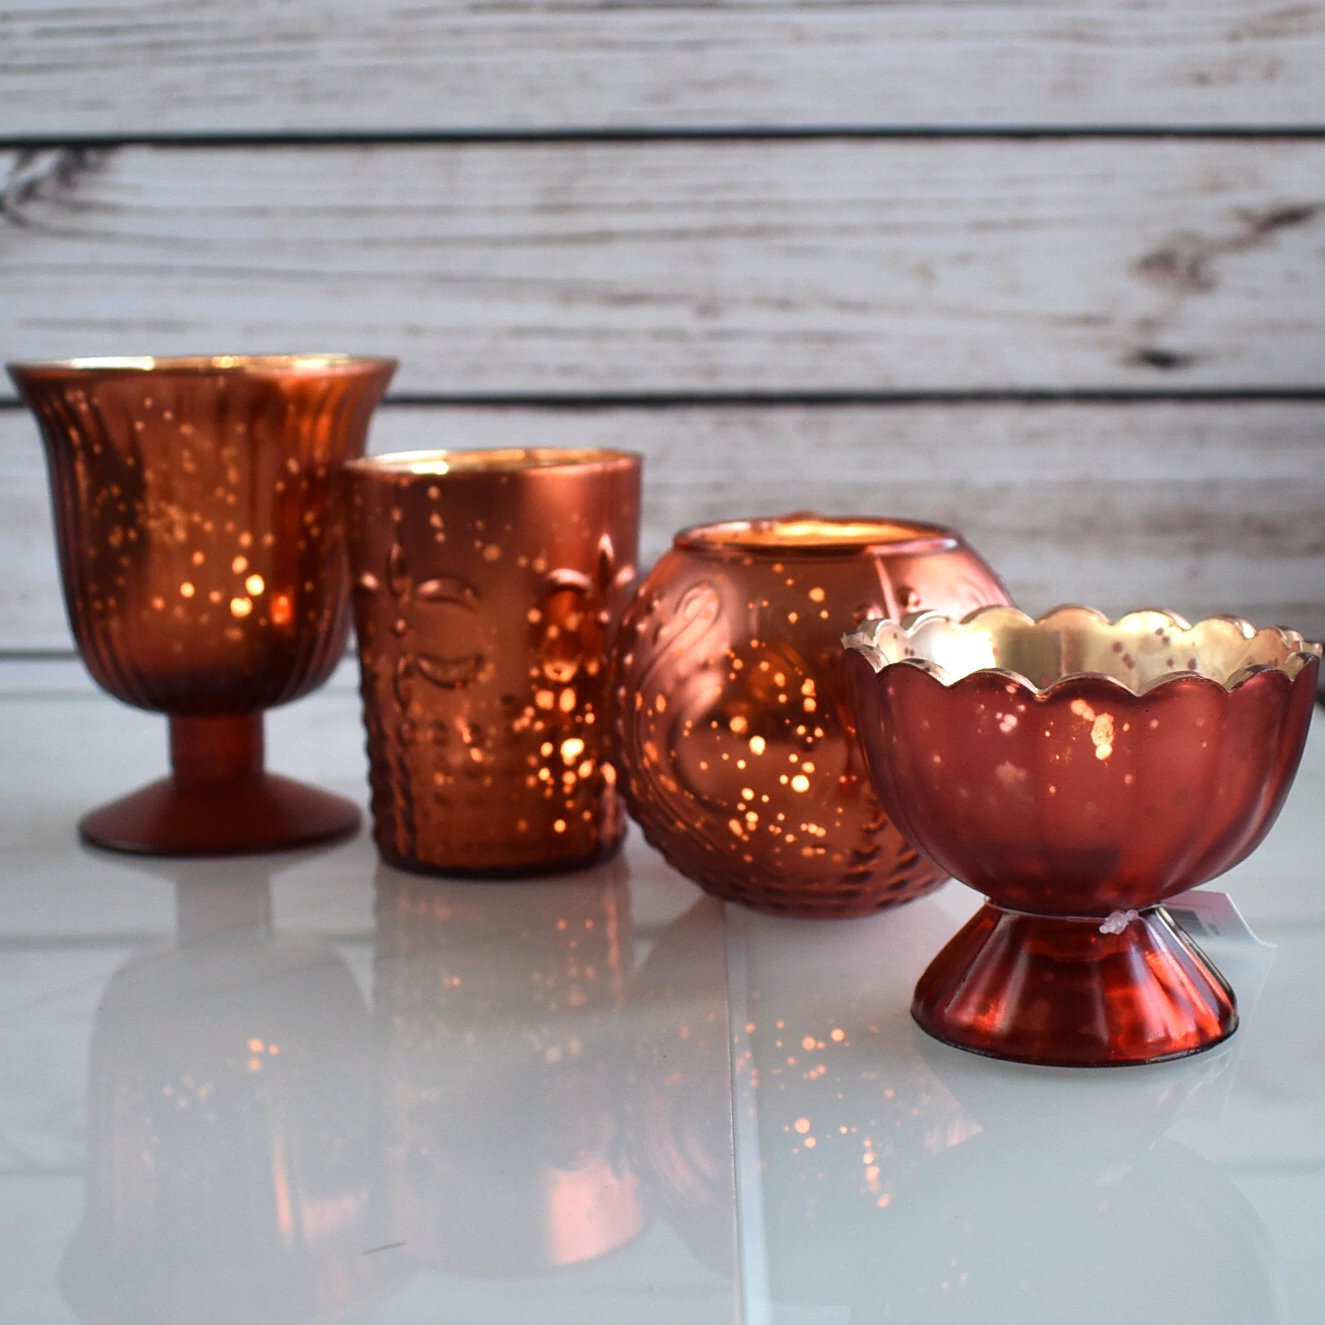 Vintage Glam Mercury Glass Tealight Votive Candle Holders (Rustic Copper Red, Set of 4, Assorted Designs, Sizes) - Weddings Events Parties Home Decor - AsianImportStore.com - B2B Wholesale Lighting & Decor since 2002